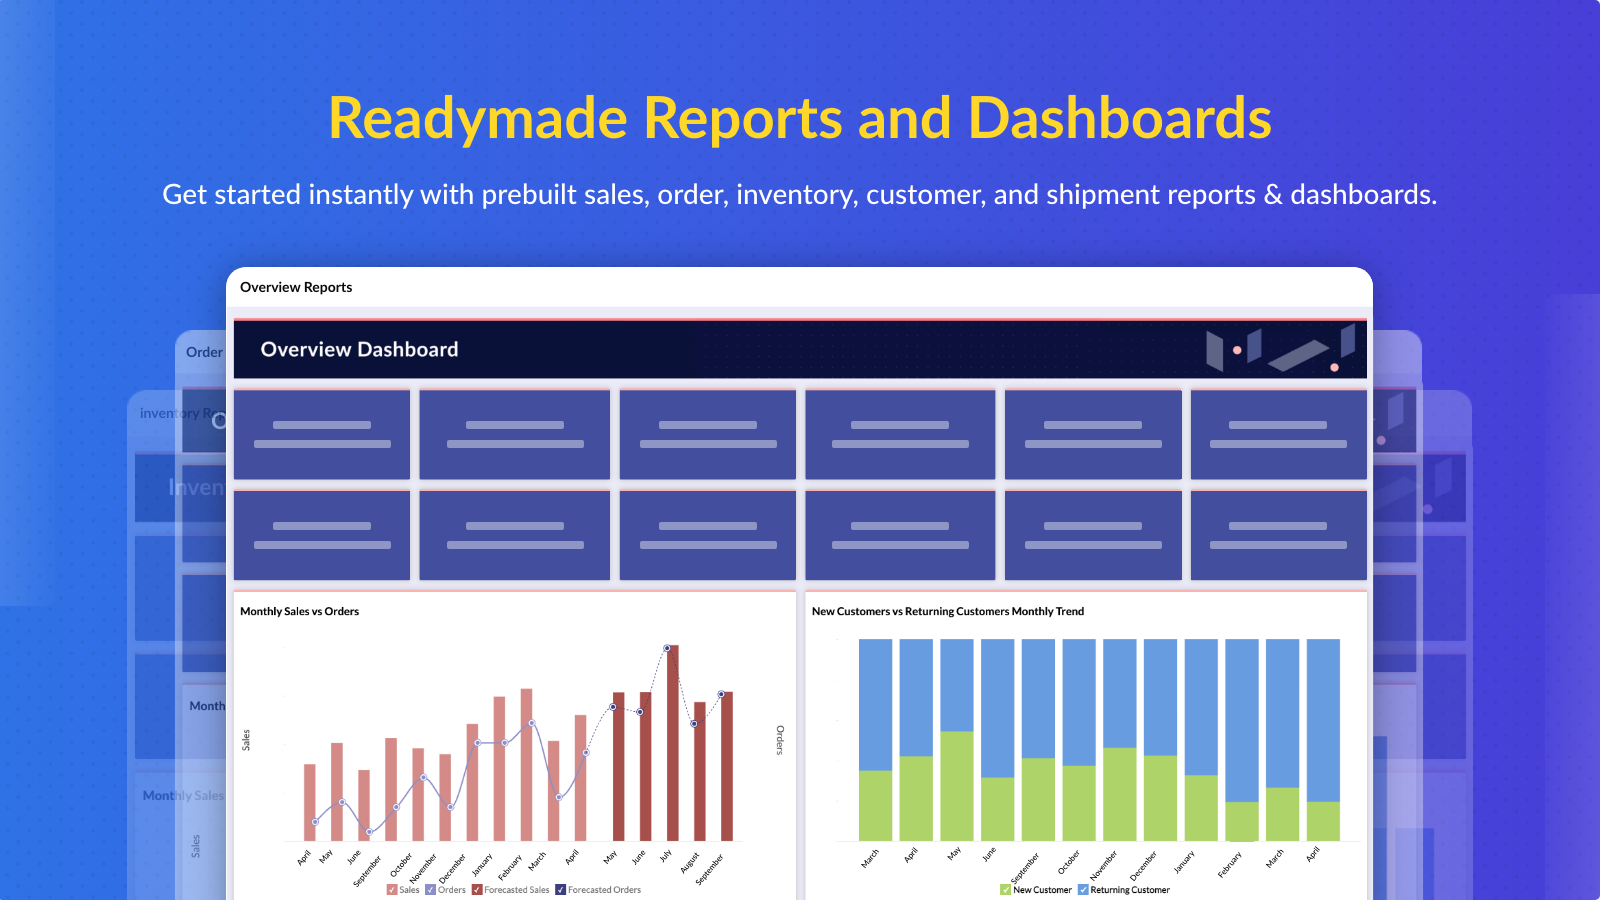 Sales, Order, Products, Customer, Shipment Reports & Dashboards